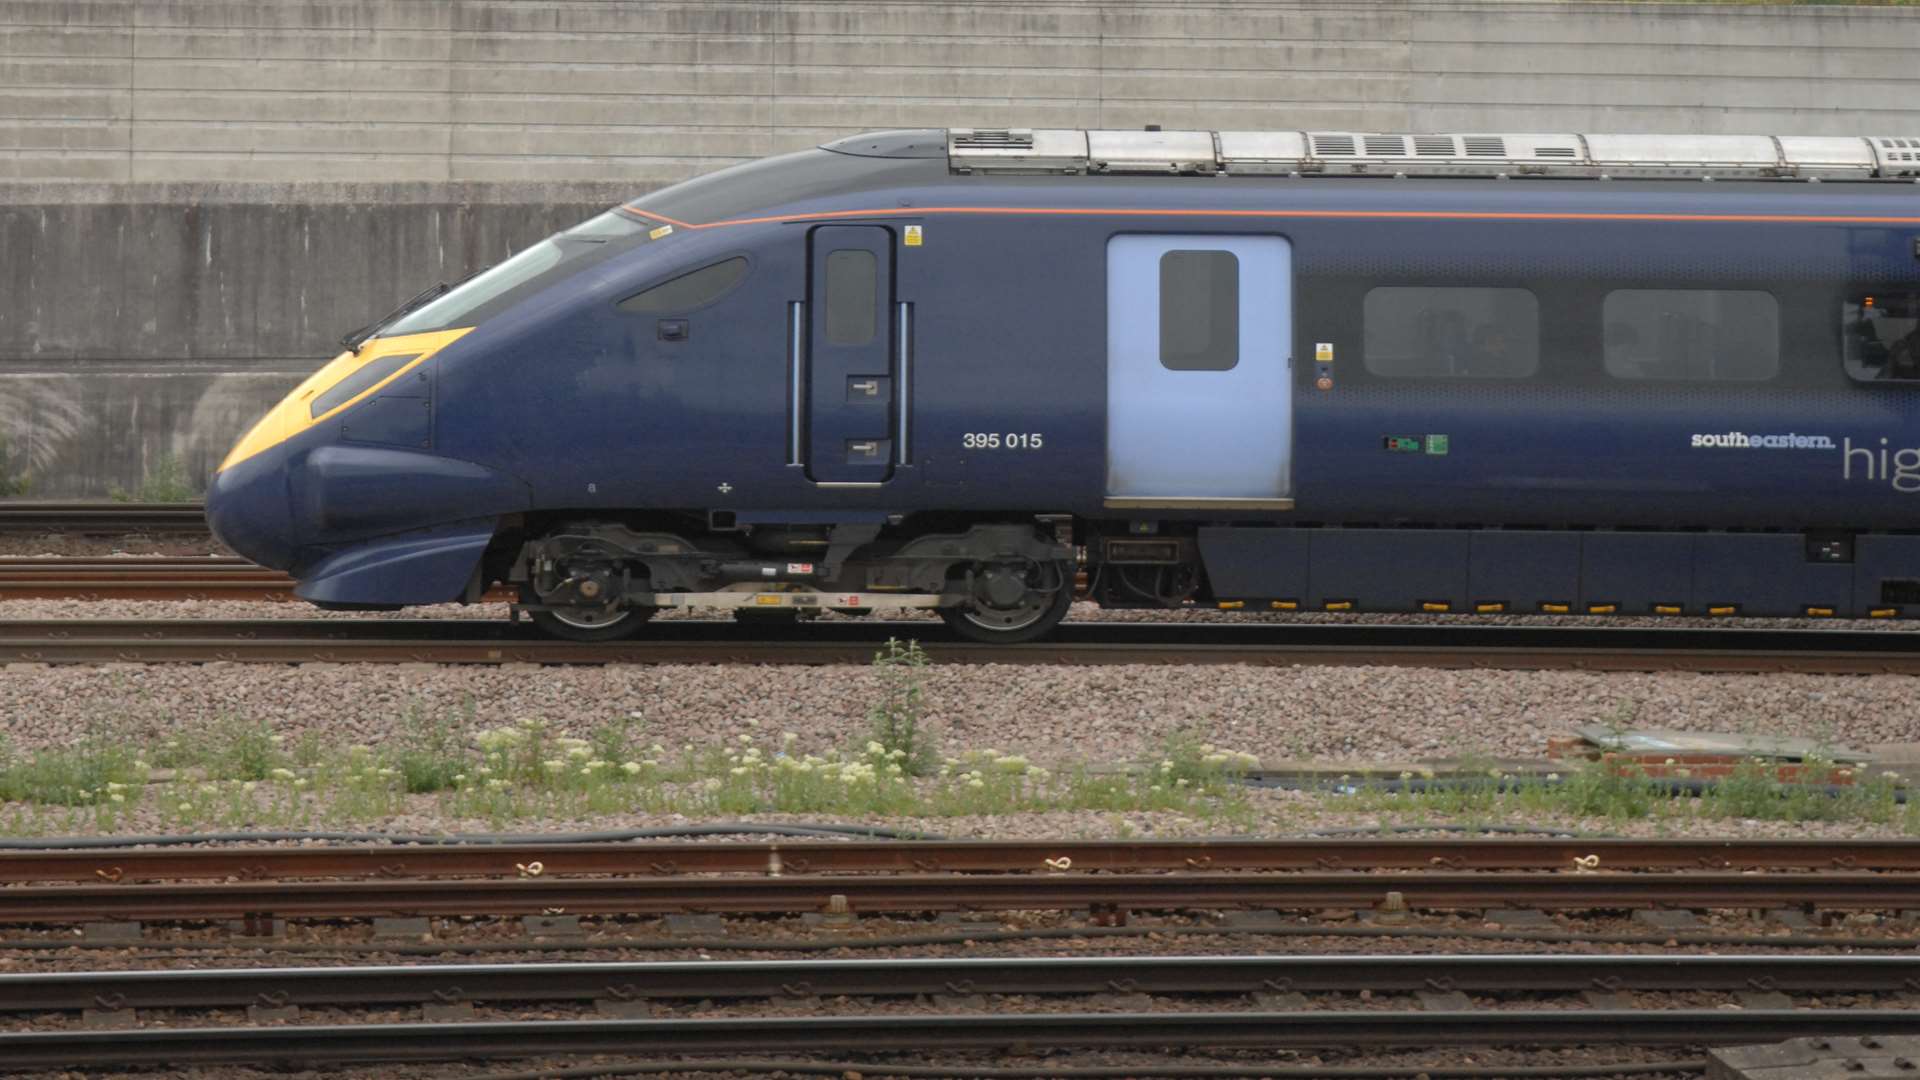 Trains to and from Eastbourne from Ashford were disrupted